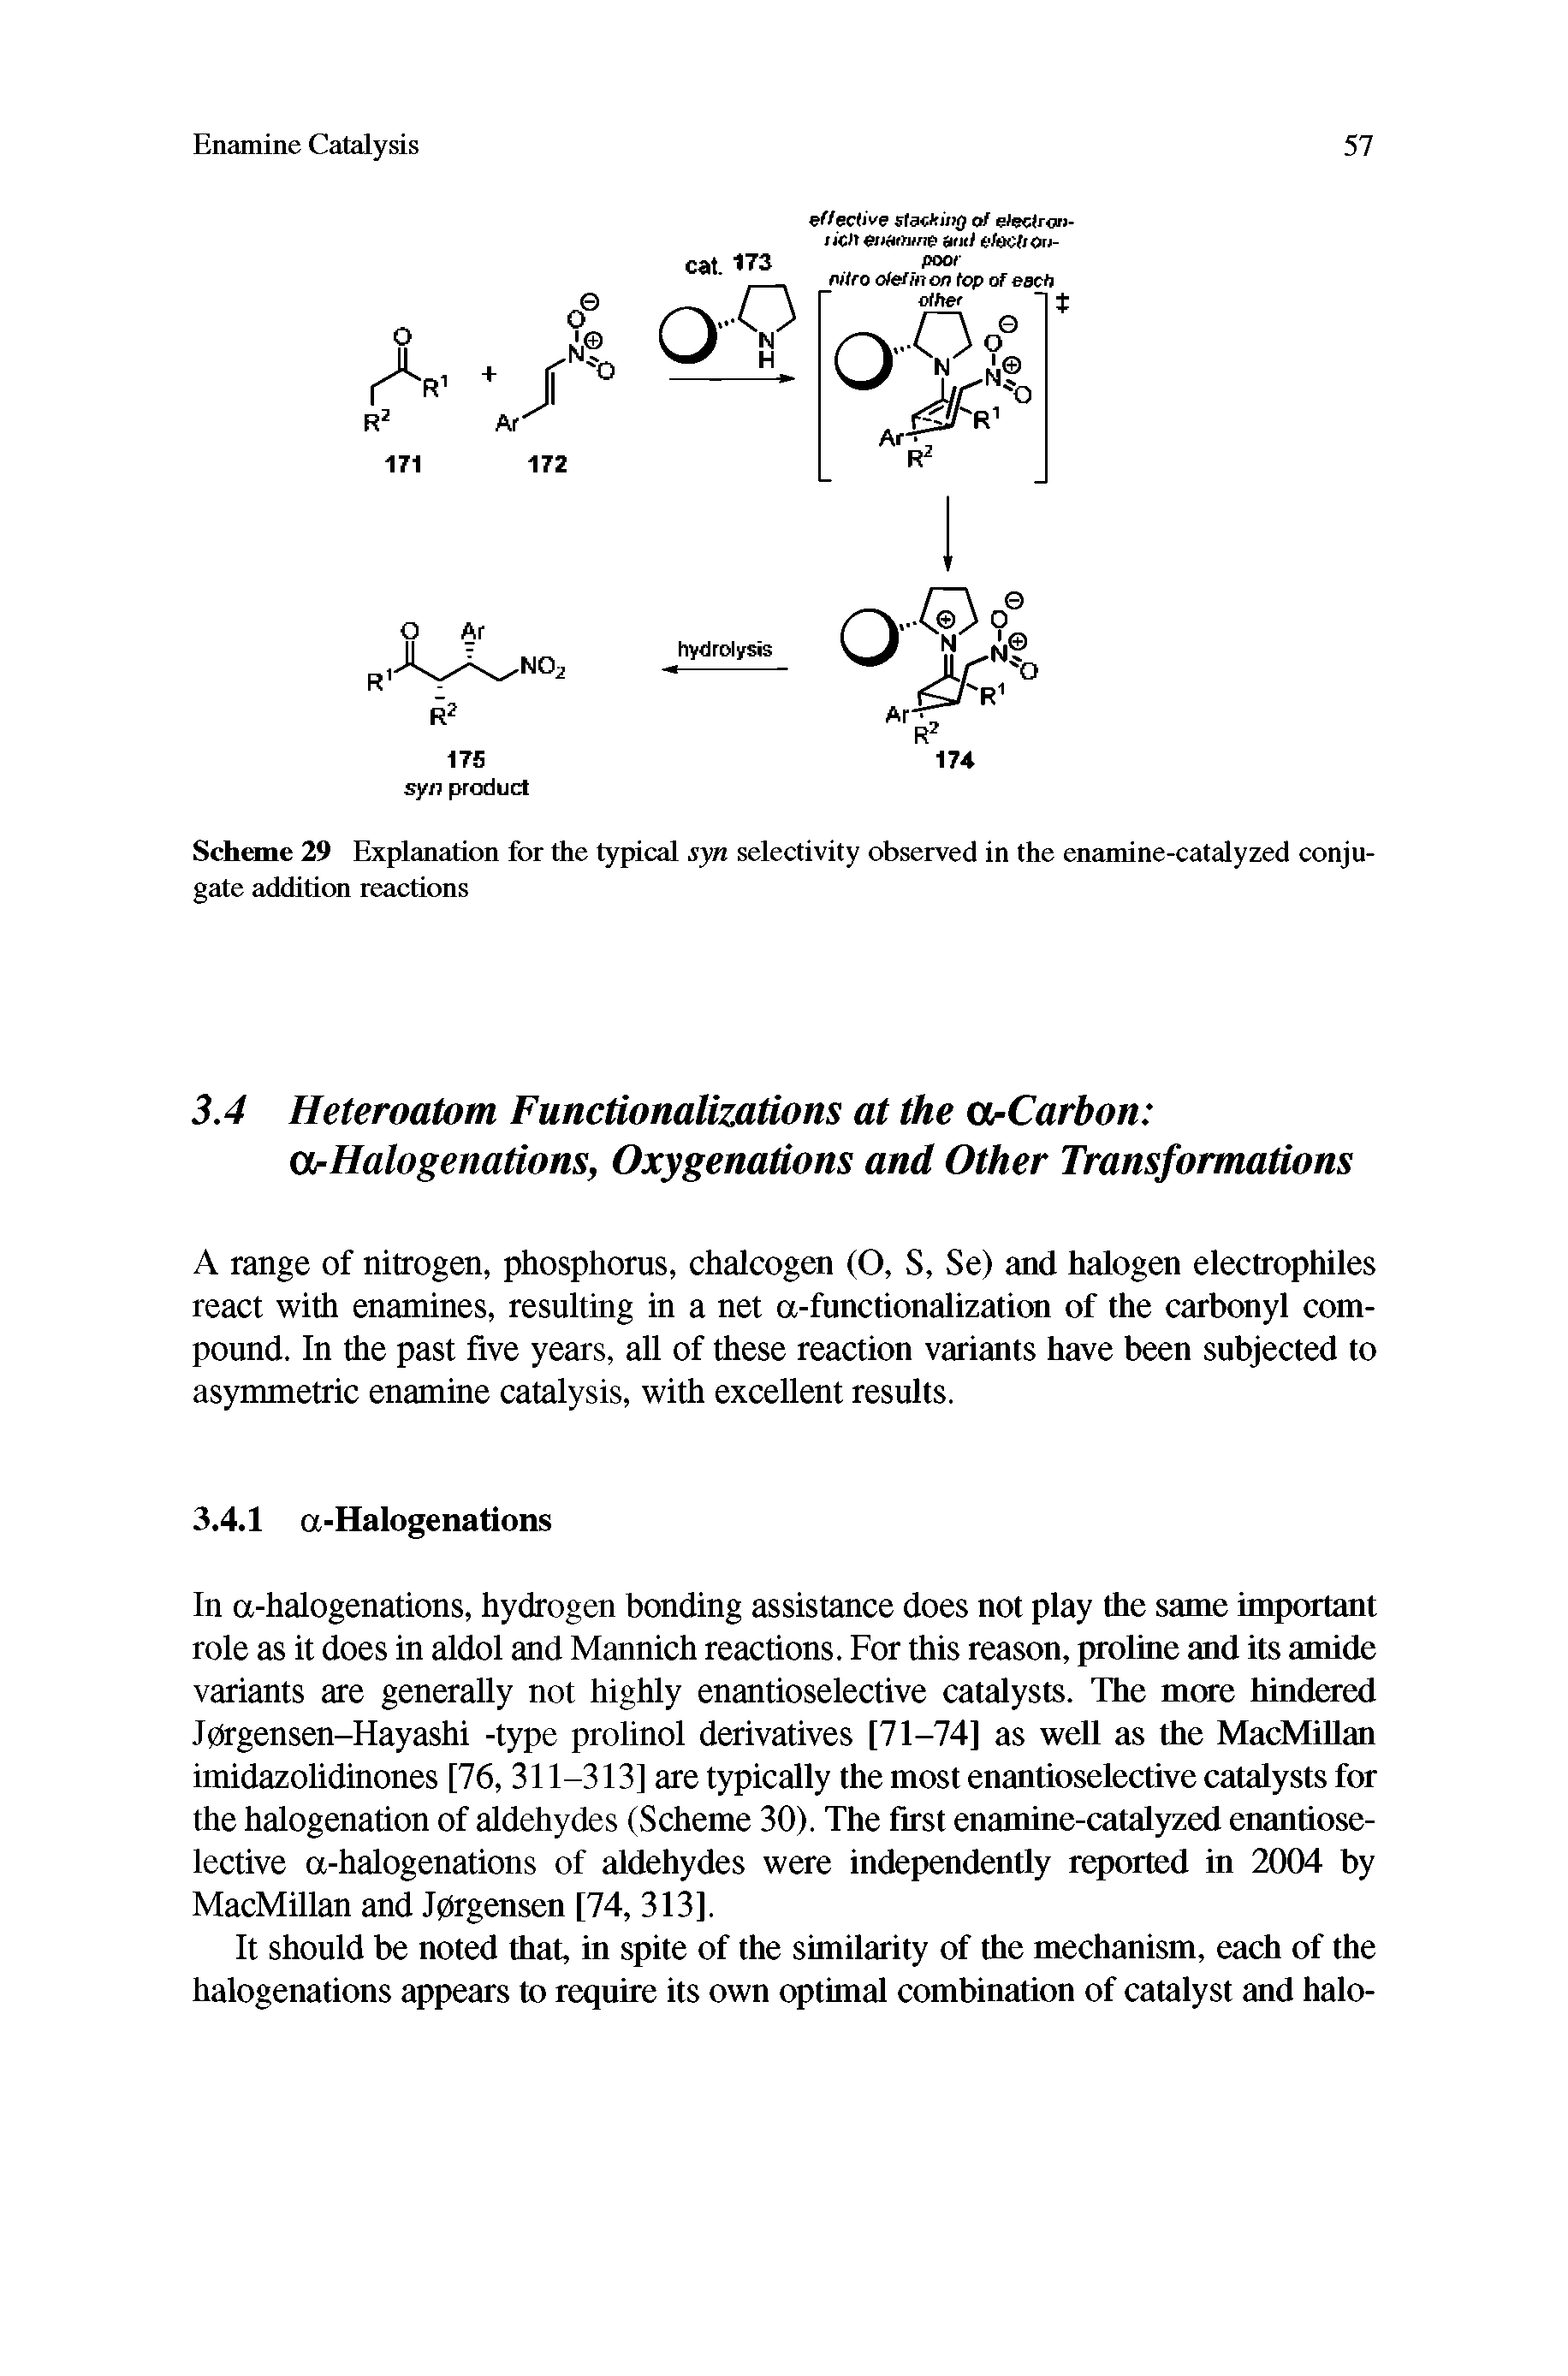 Scheme 29 Explanation for the typical syn selectivity observed in the enamine-catalyzed conjugate addition reactions...